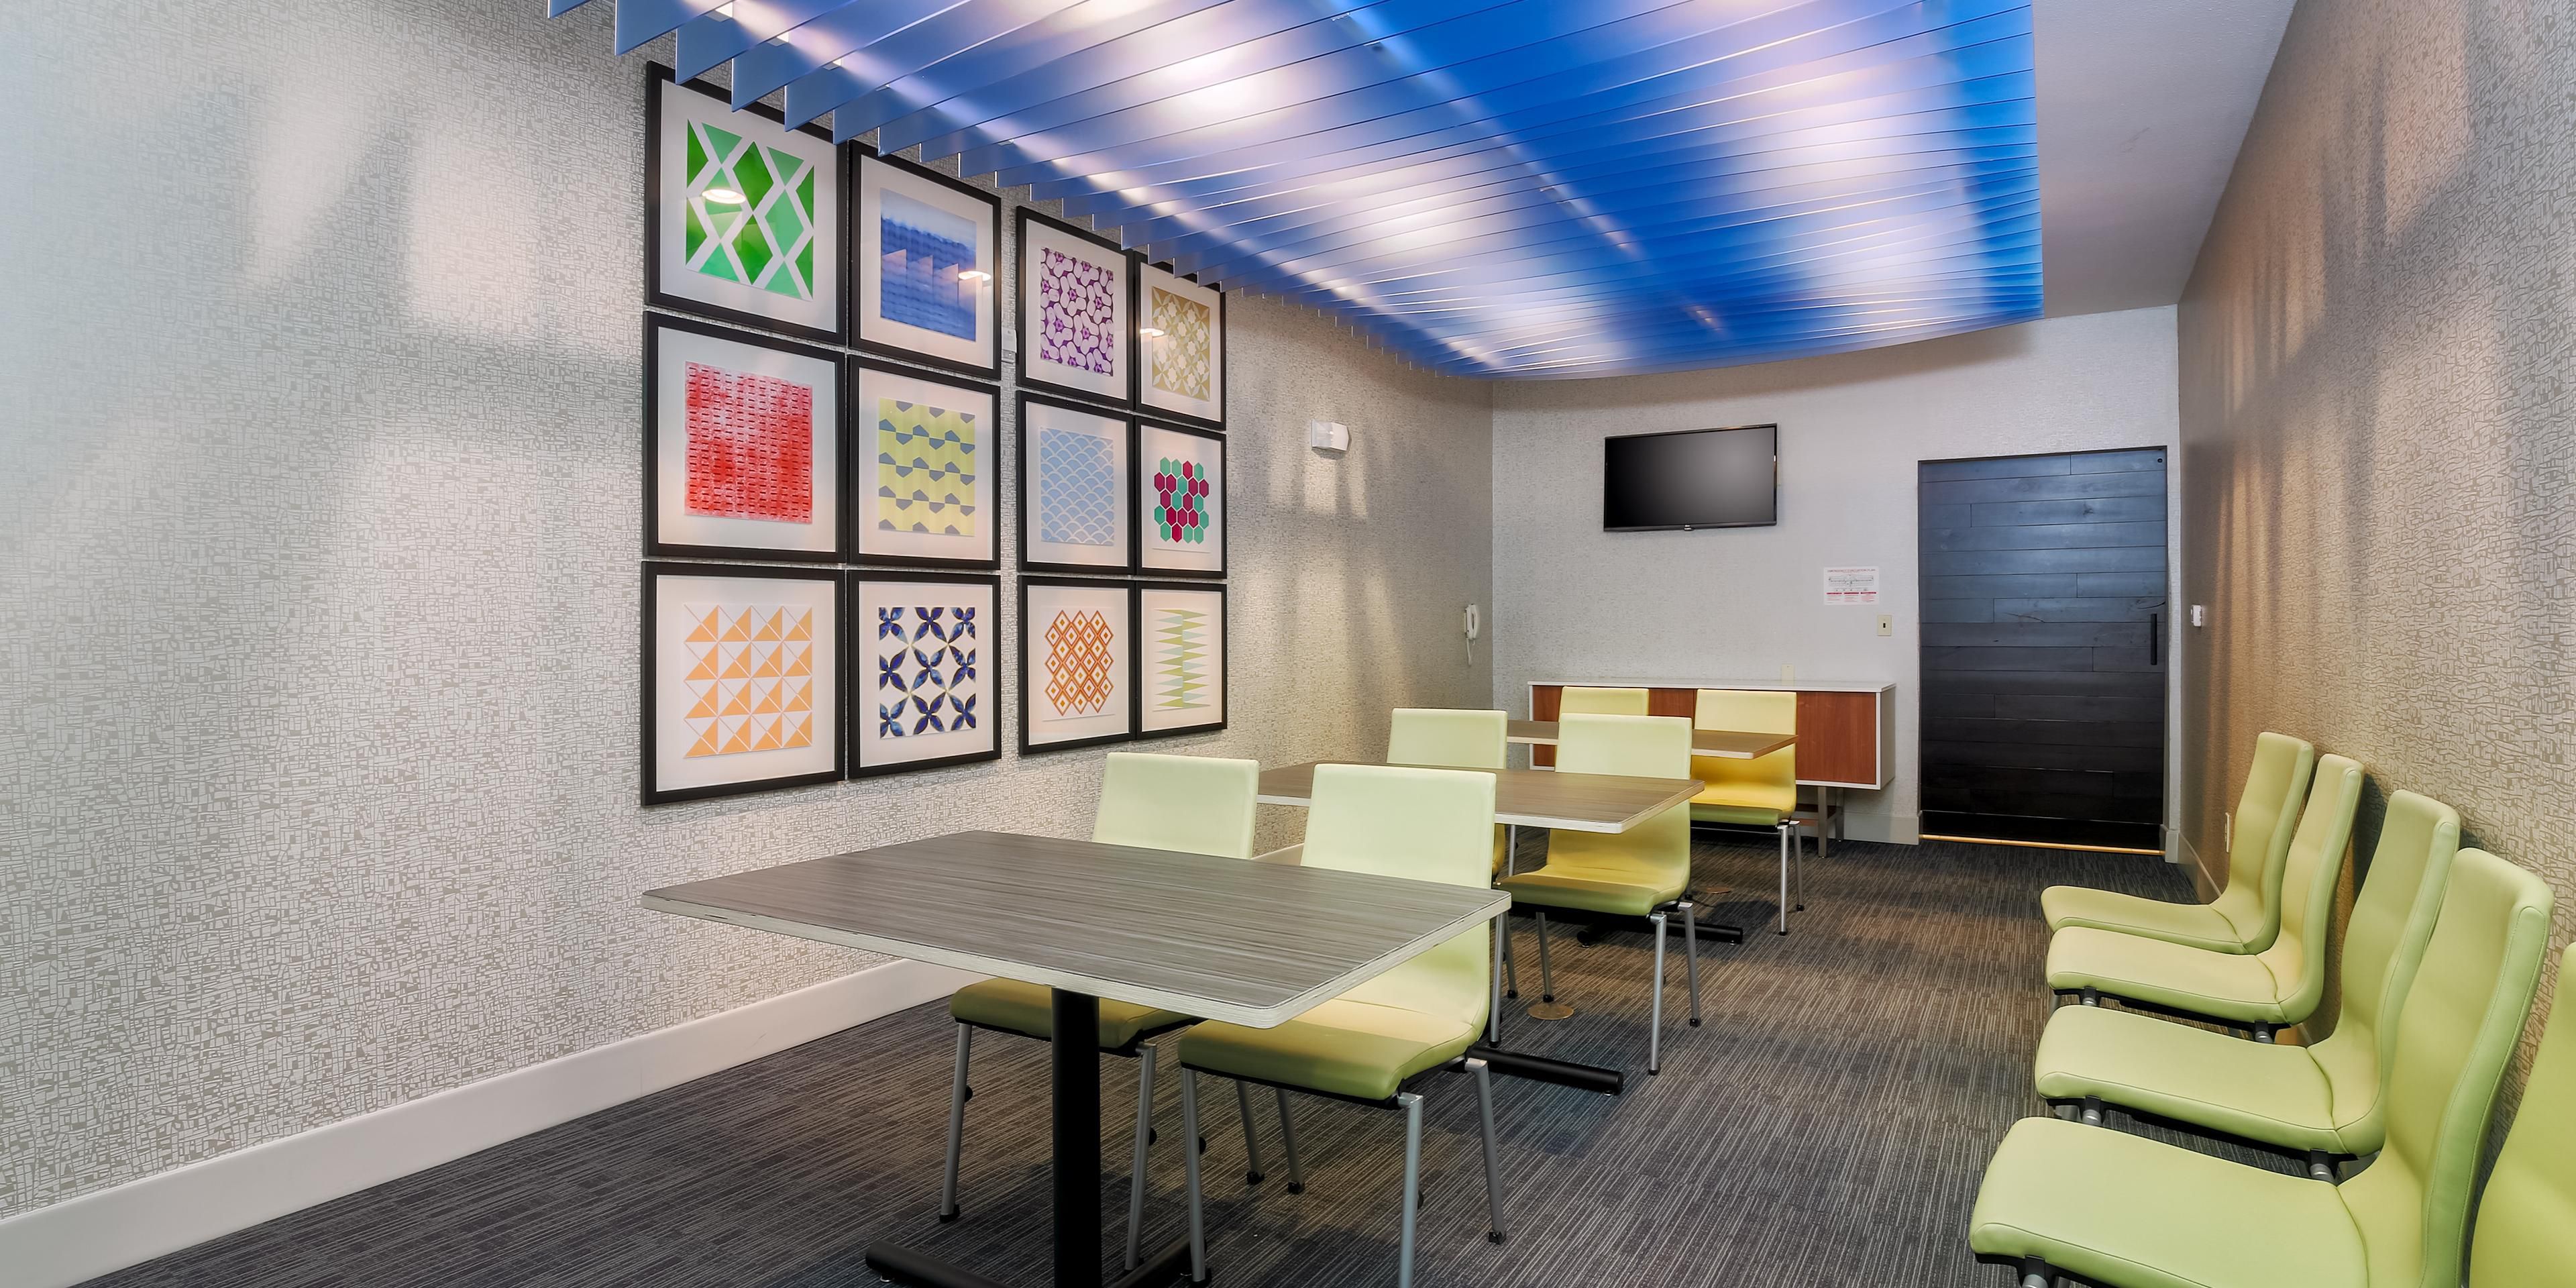 Holiday Inn Express Las Vegas - South has a meeting room on site. Room Rental includes high speed Wi-Fi. Call today to reserve your space!
